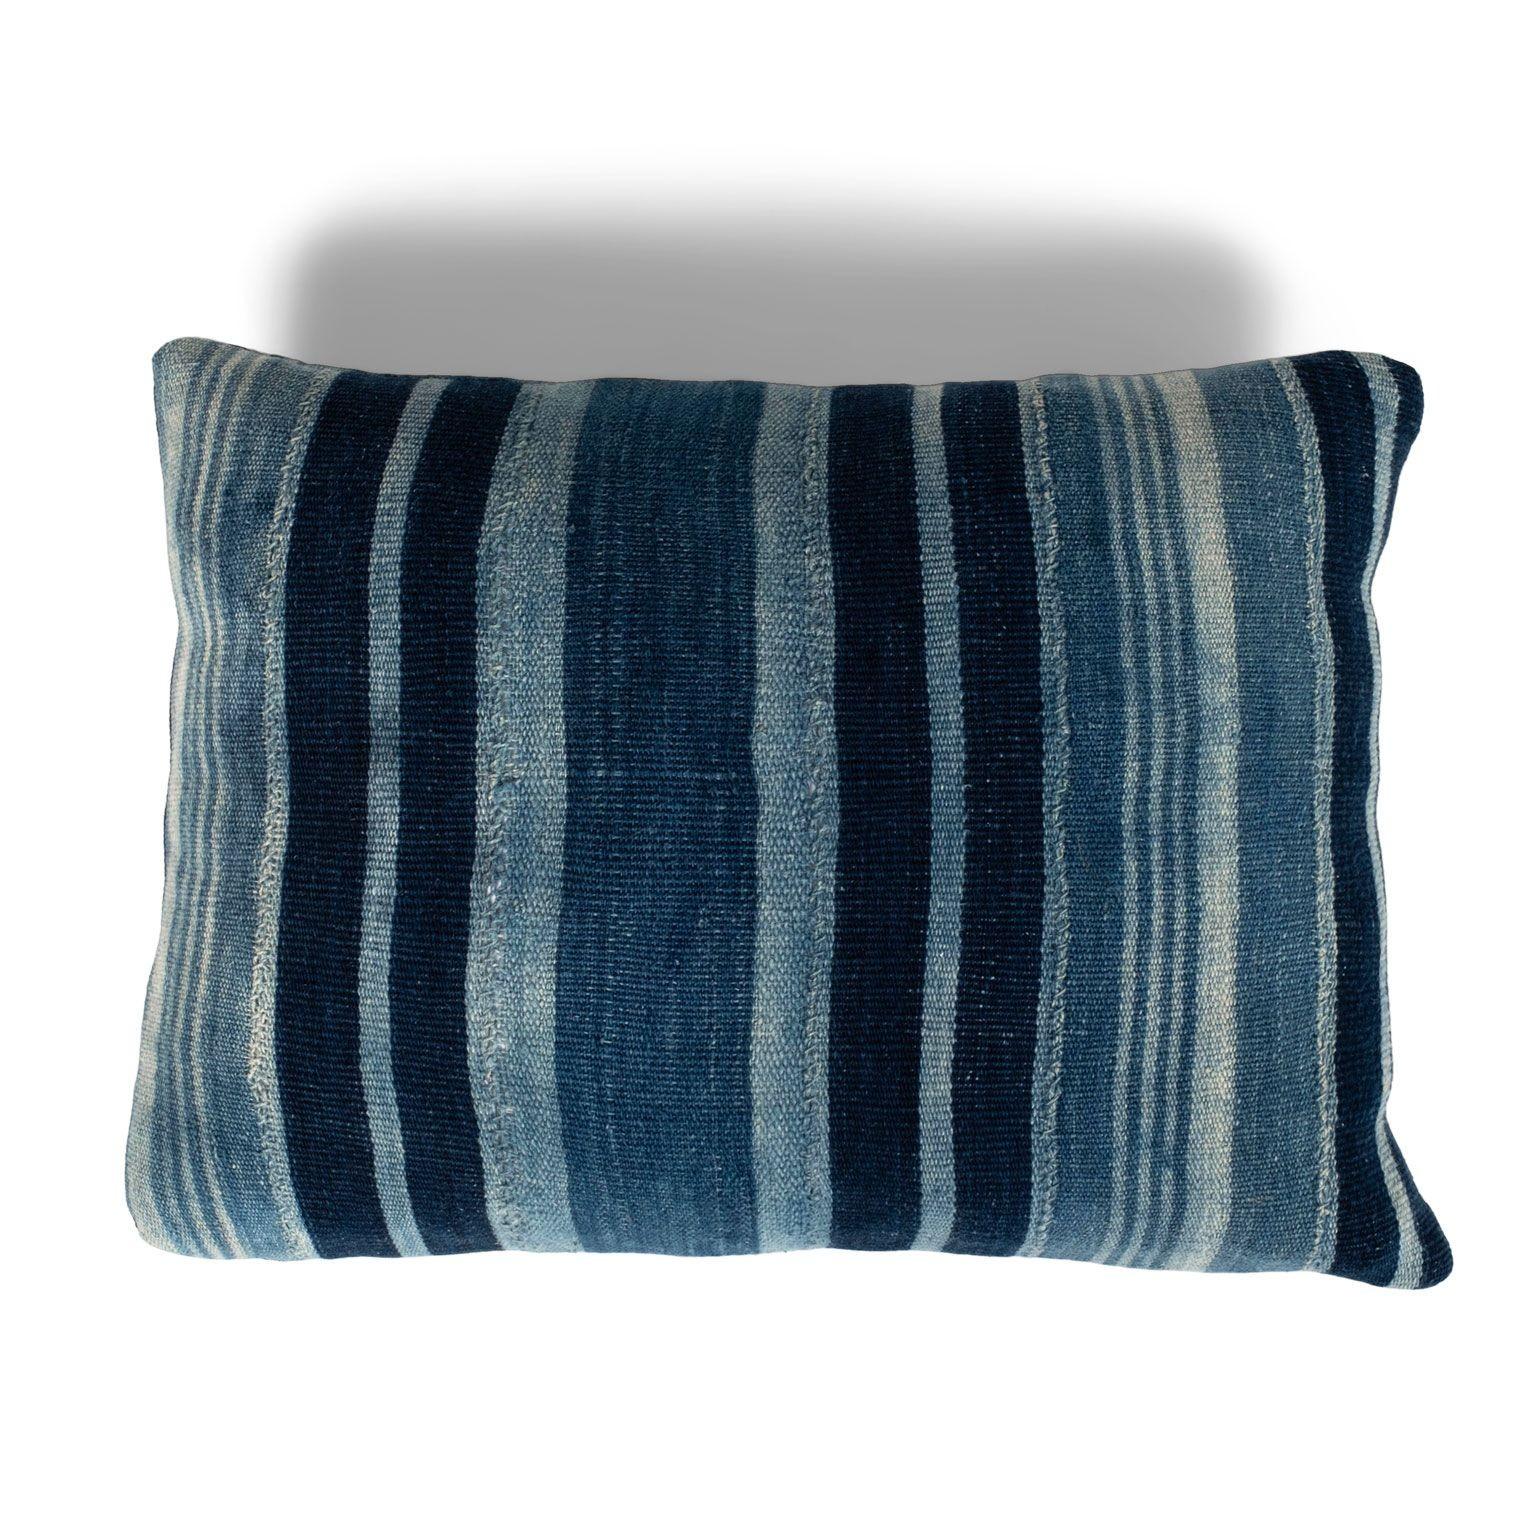 Rich faded indigo stripe cushion made from vintage handwoven and hand-dyed slubby cotton fabric. This decorative pillow includes a zip fastener and feather insert. Two available. Sold separately and priced $480 each.